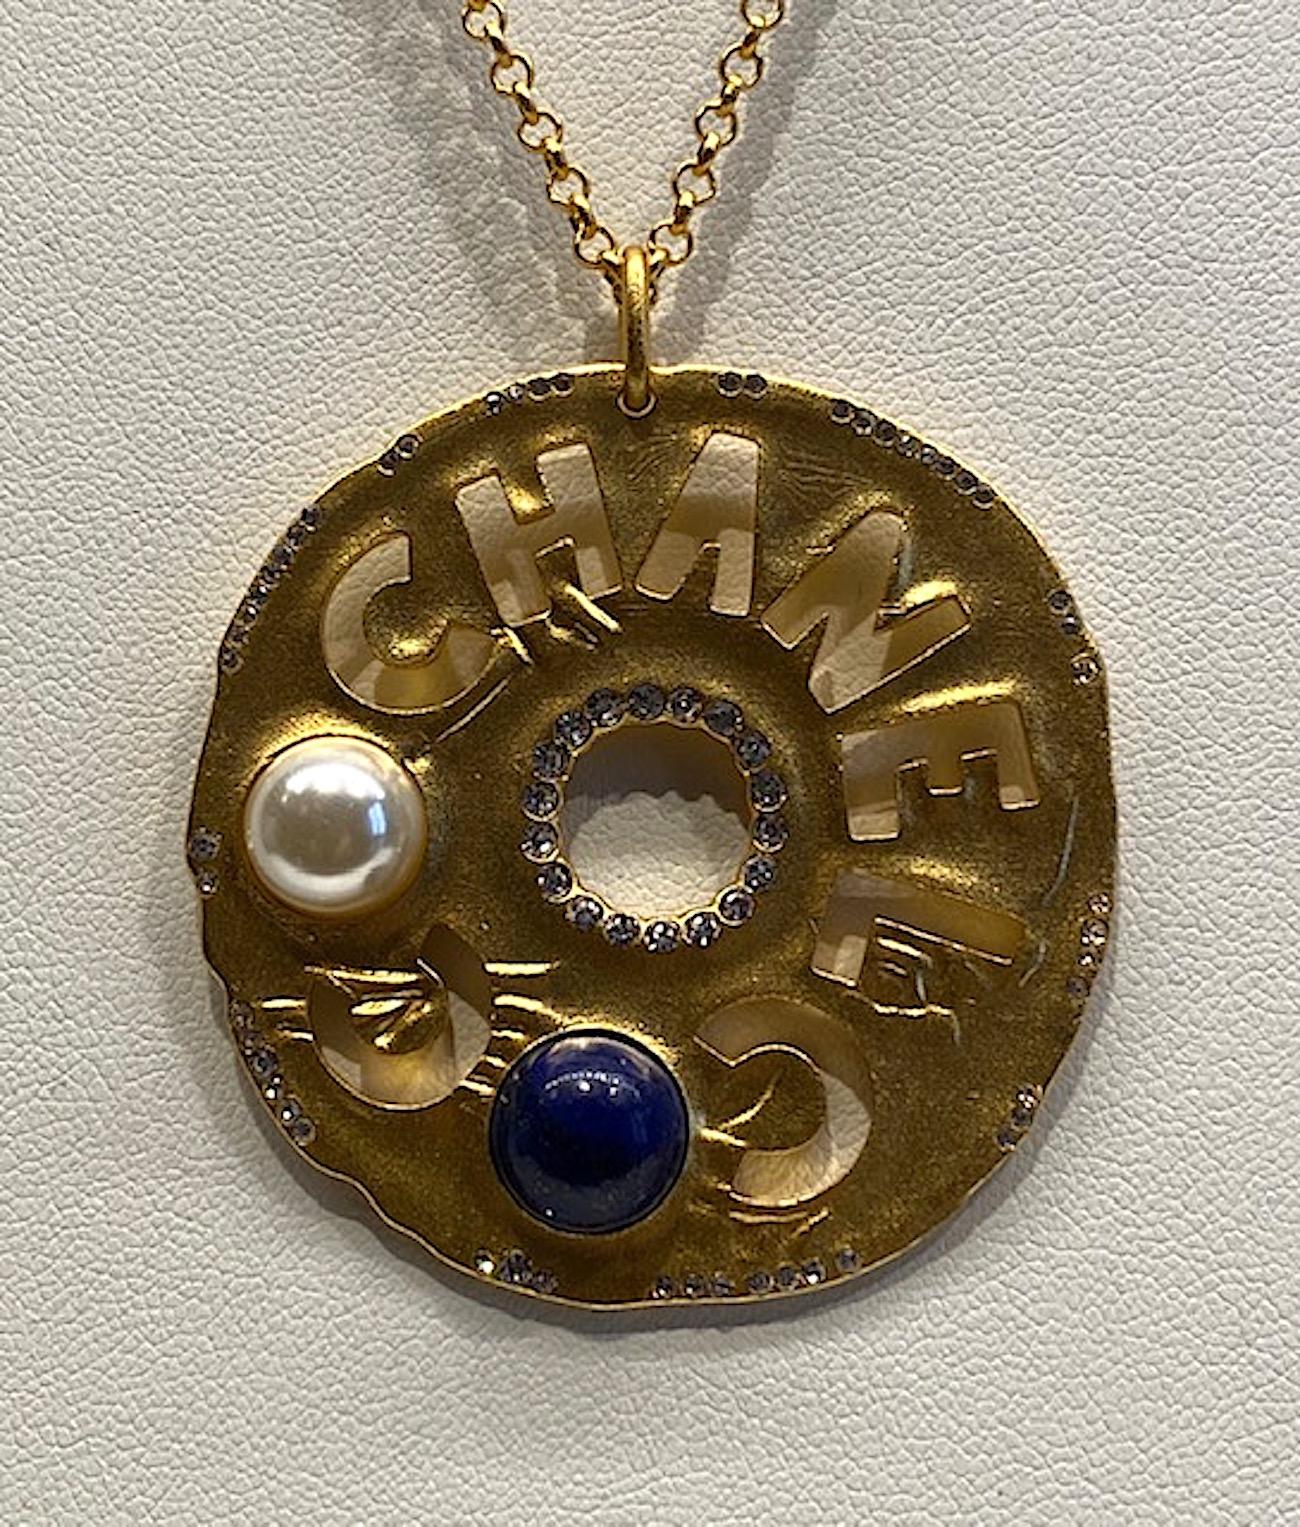 Chanel Cut Out Disk Pendant Necklace, 2019 Cruise Collection 1